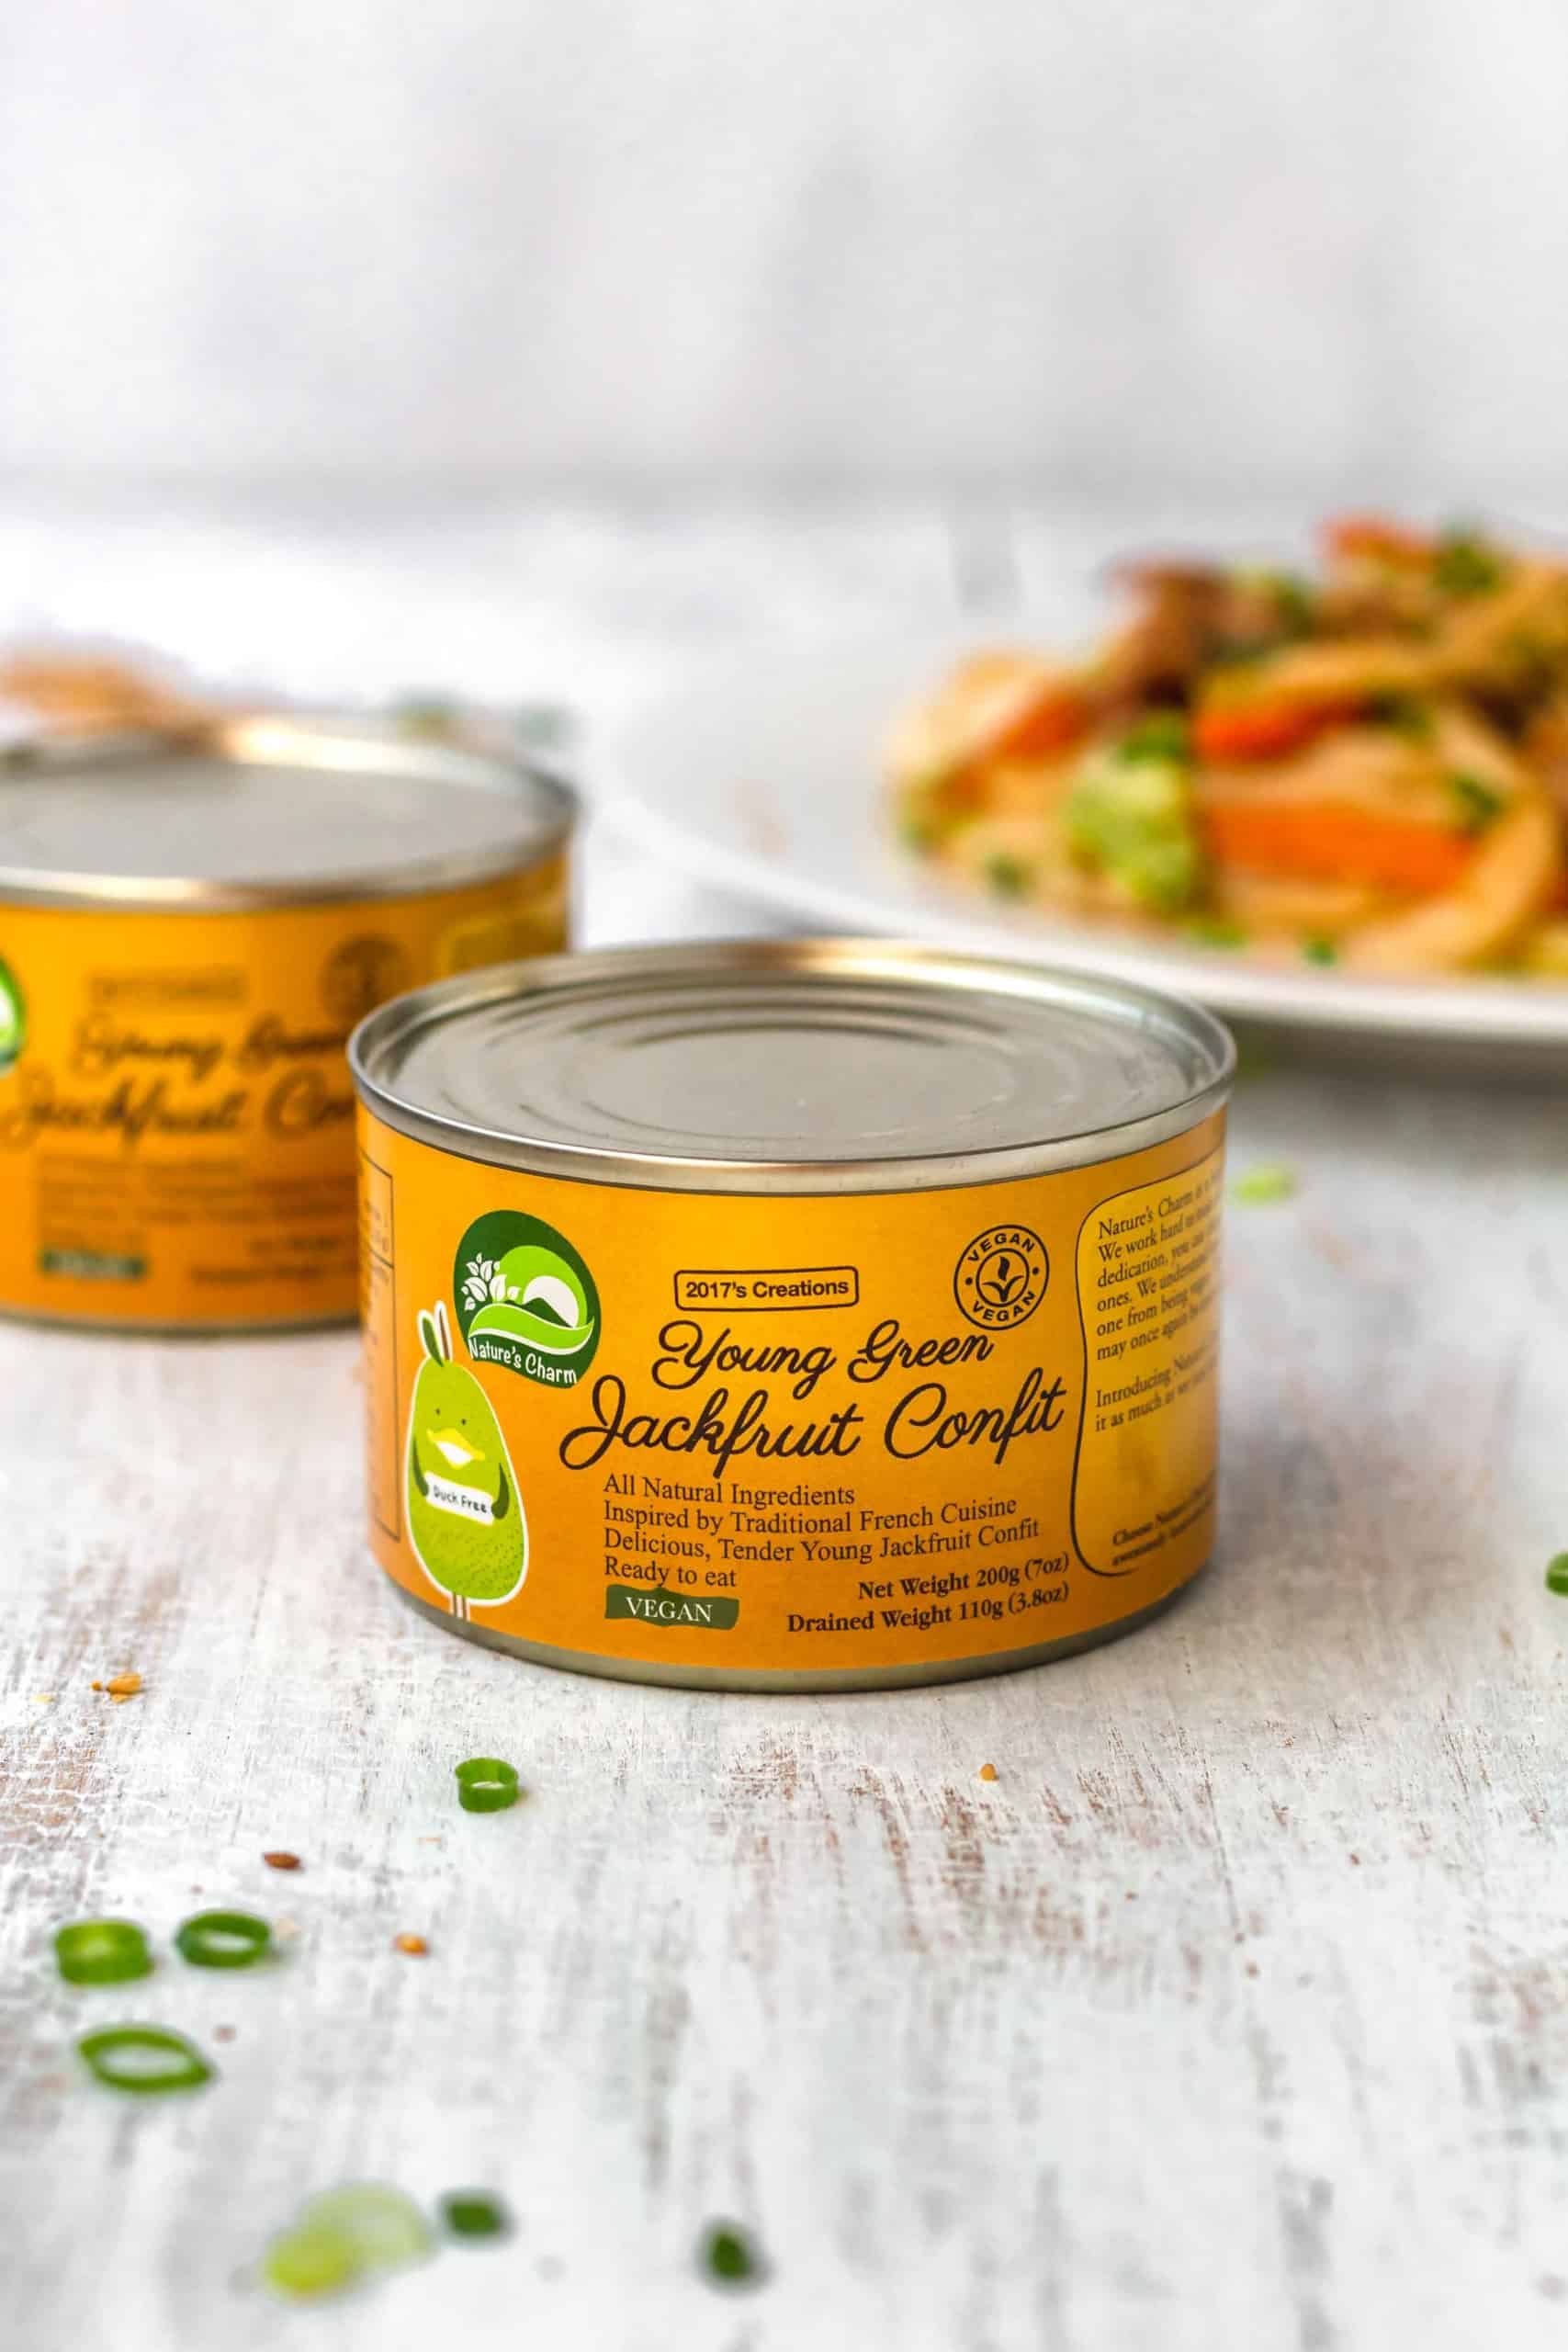 Cans of young green jackfruit confit